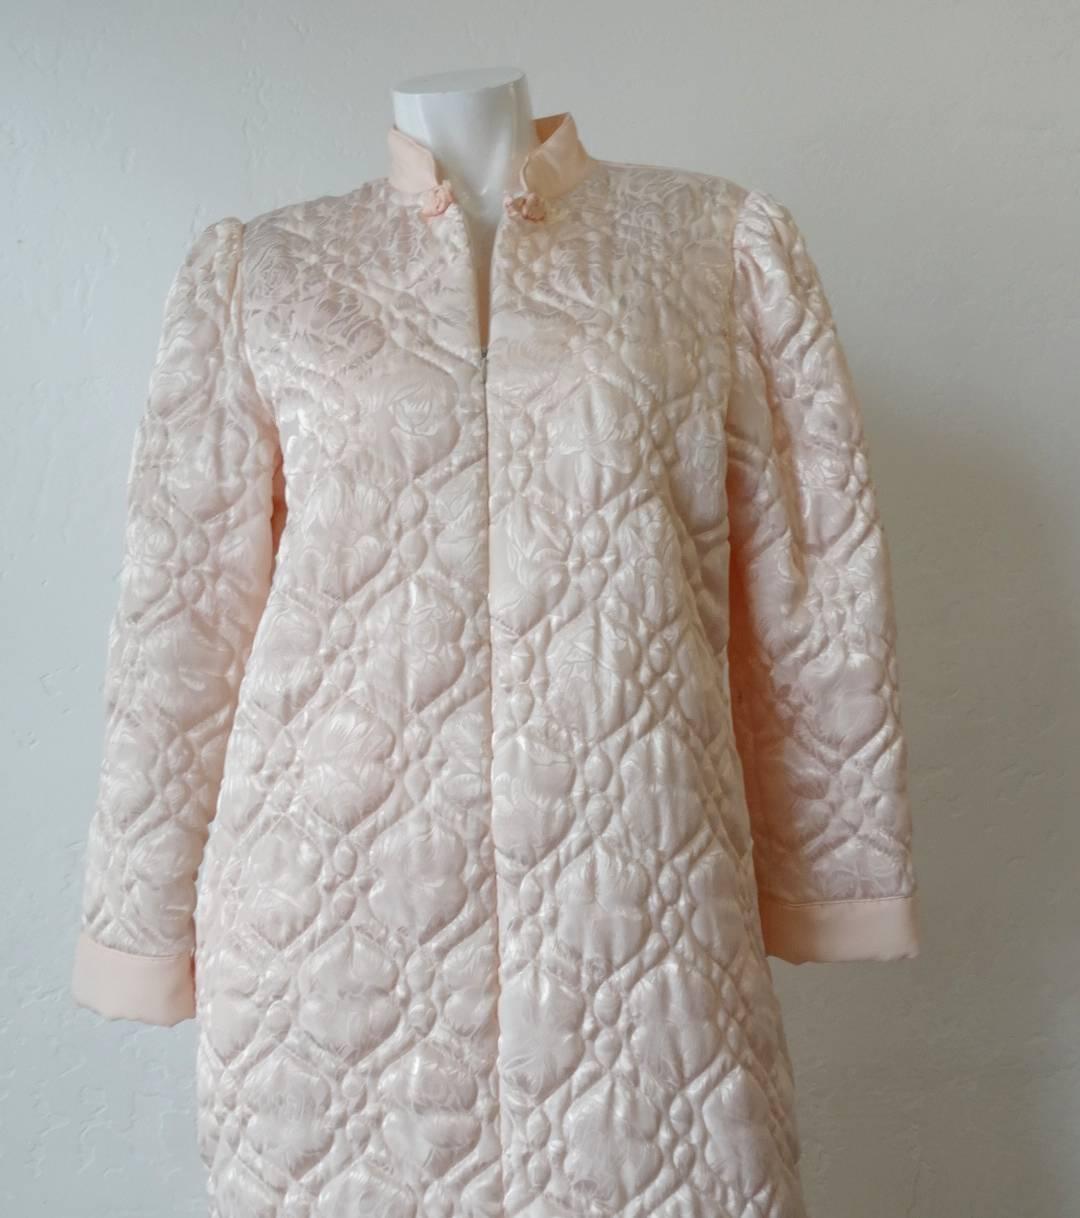 Rock the pajamas-all-day look with this adorable 1980s Christian Dior coat! Made of a soft pink satin, stitched intricately with a quilted pattern. Mandarin style collar, zips all the way up the front with a hidden zipper. Long sleeves with slightly